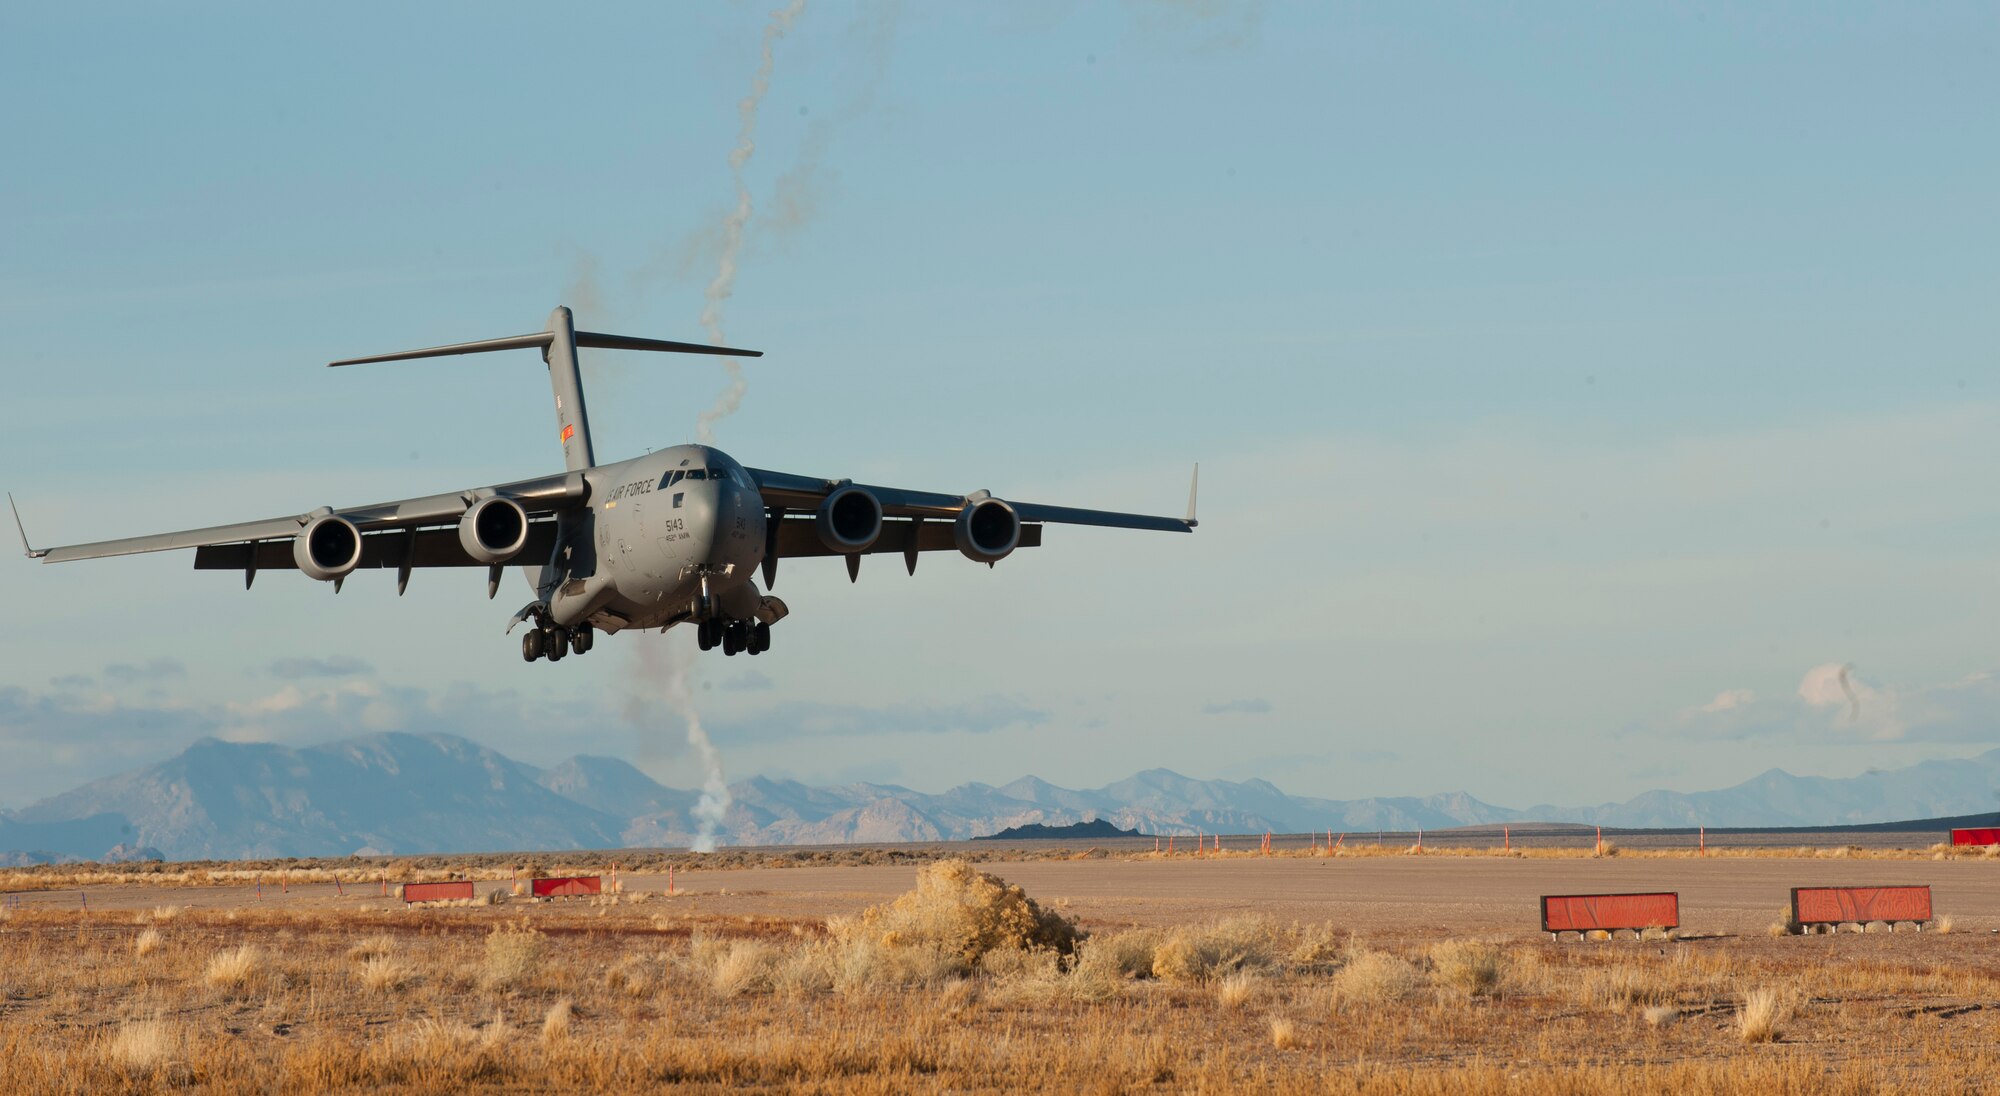 A U.S. Air Force C-17 Globemaster III assigned to March Air Reserve Base, Calif., approaches for landing on a degraded airfield during the U.S. Air Force Weapons School's Joint Forcible Entry Exercise 14B at the Nevada Test and Training Range Dec. 6, 2014. The C-17 is capable of rapid strategic delivery of troops and all types of cargo to main operating bases or directly to forward bases in the deployment area. (U.S. Air Force photo by Airman First Class Joshua Kleinholz)